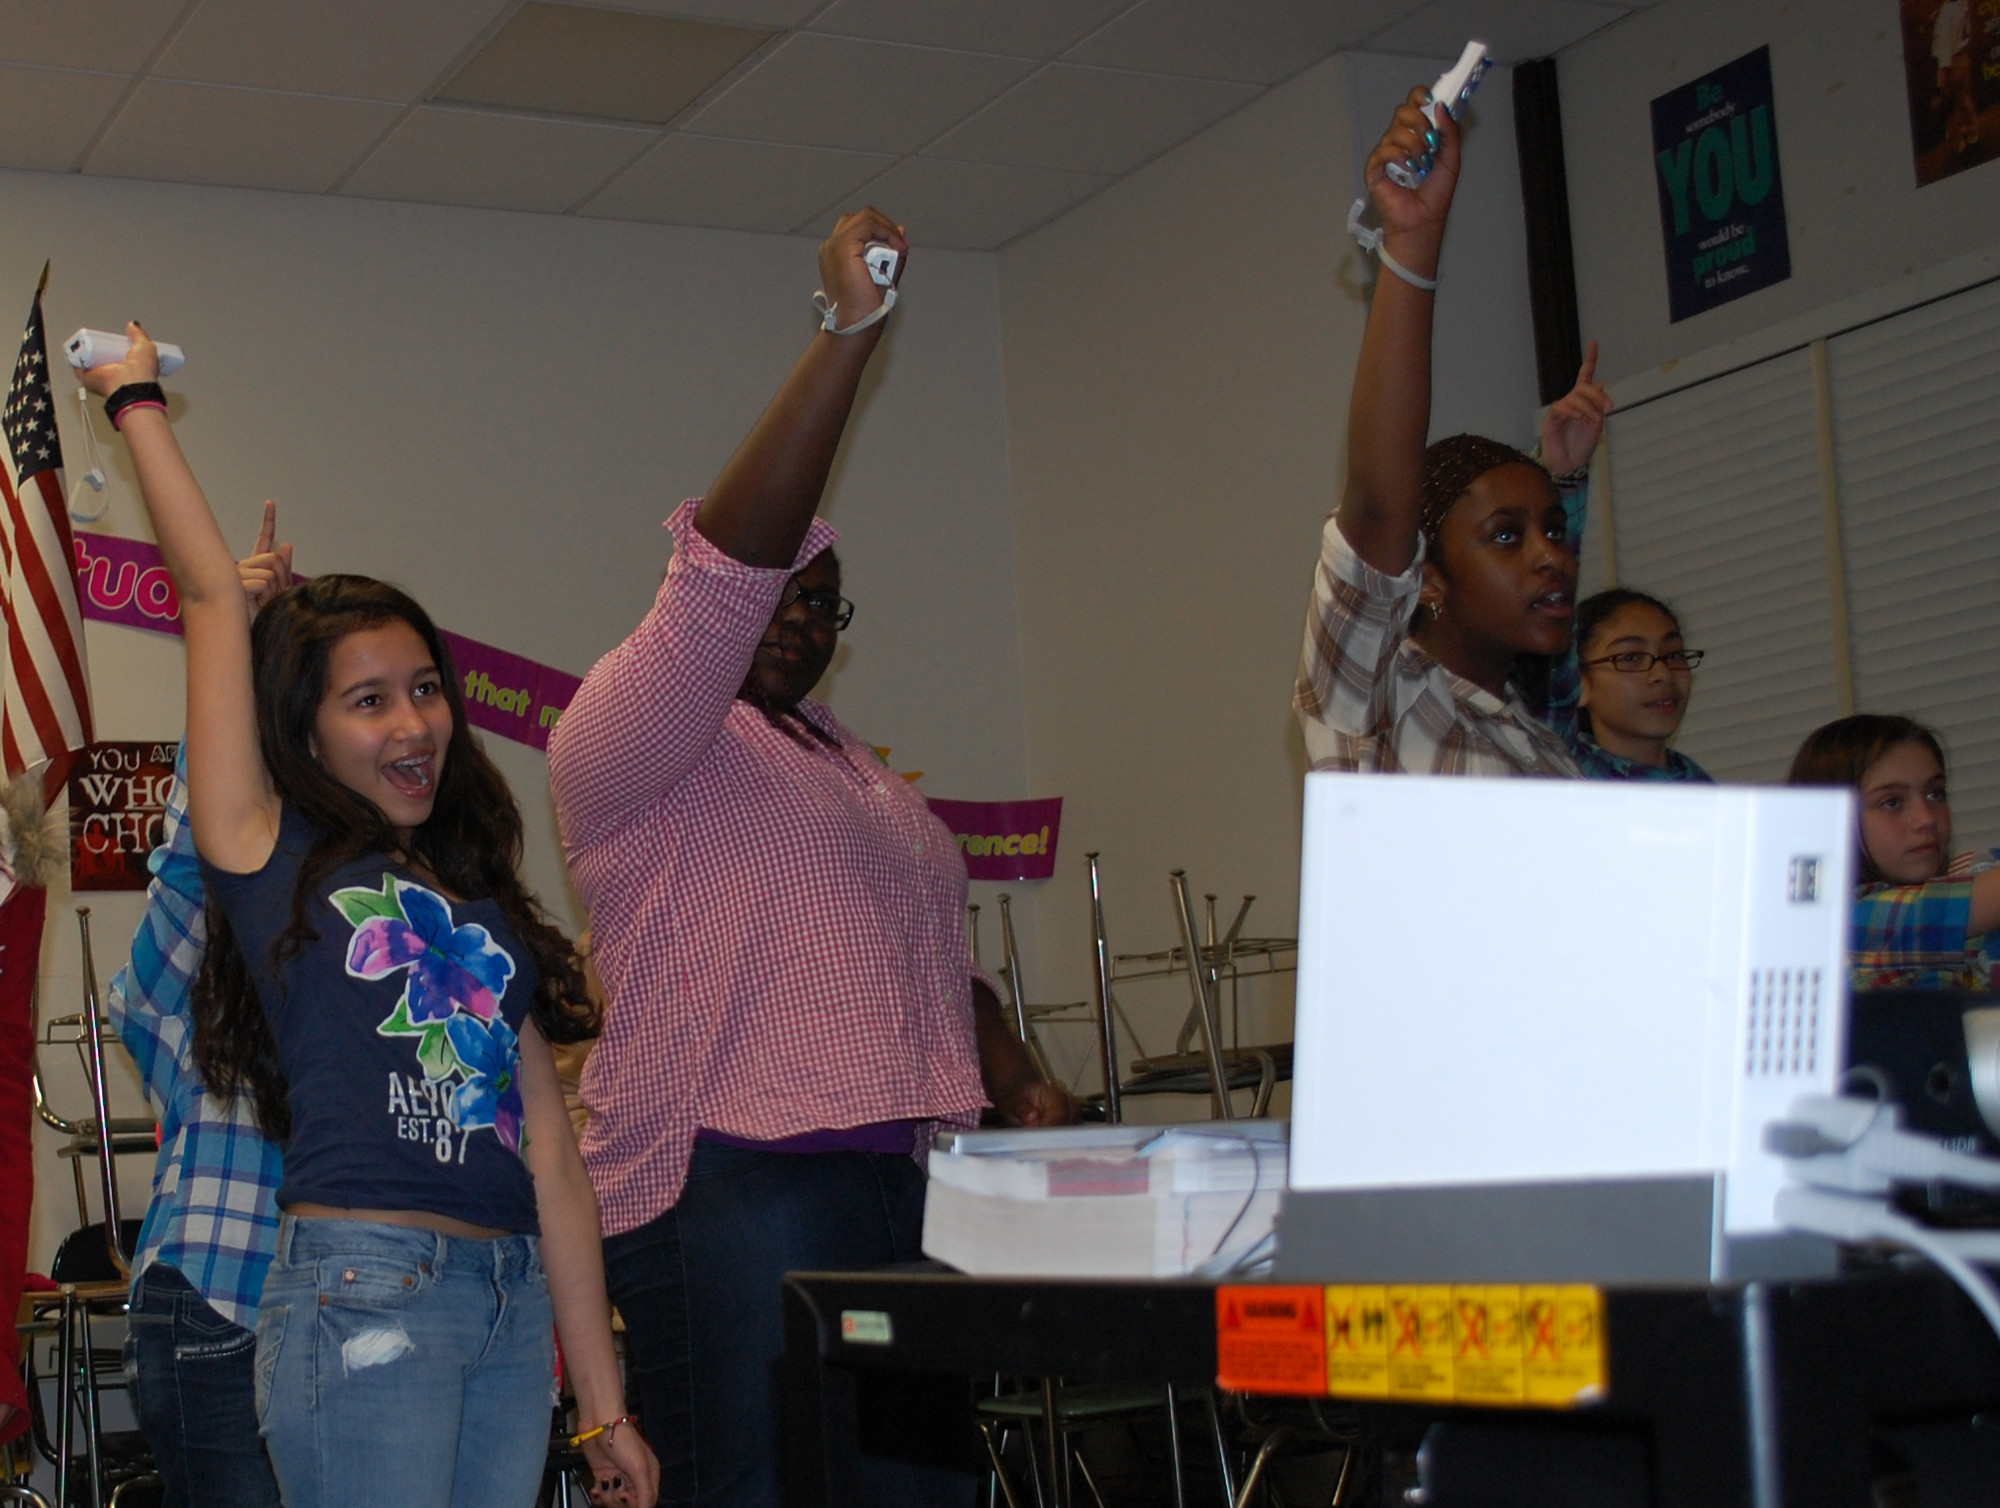 District 30 students showed how they can use interactive video games to stay physically fit.